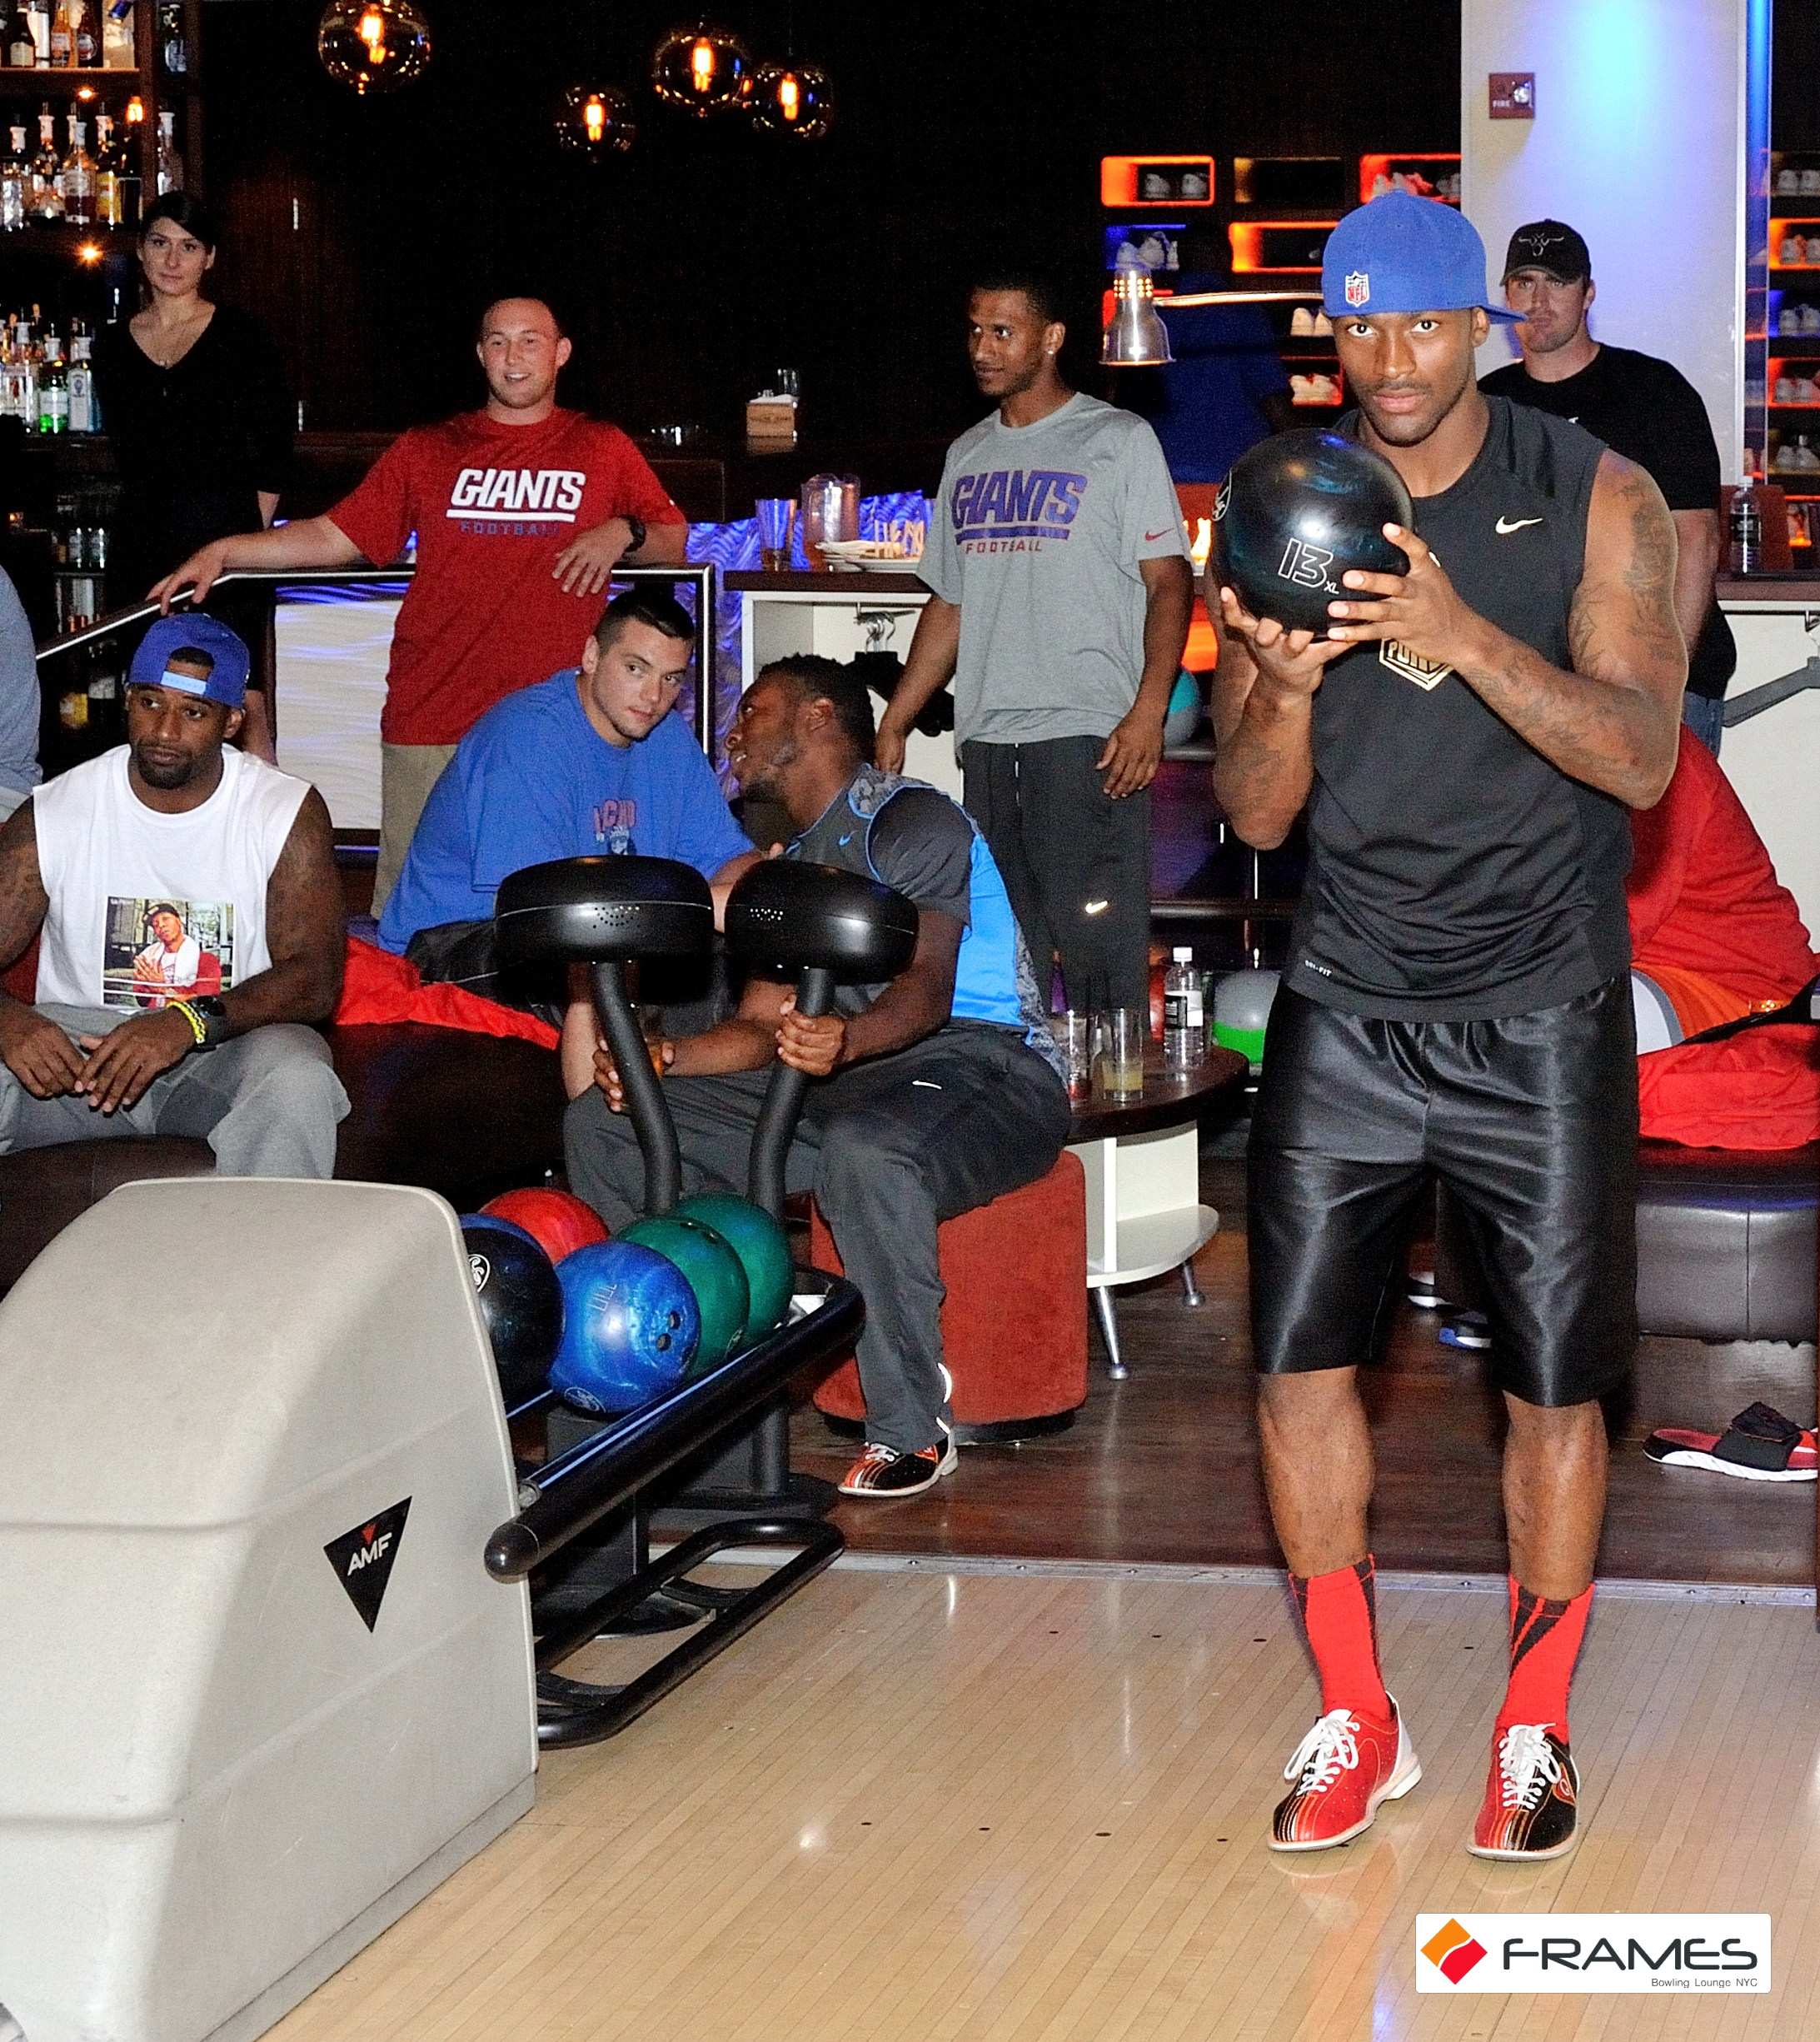 Entire NY GIANTS Football Team Celebrate a Boys Night Out at Frames Bowling Lounge2185 x 2451